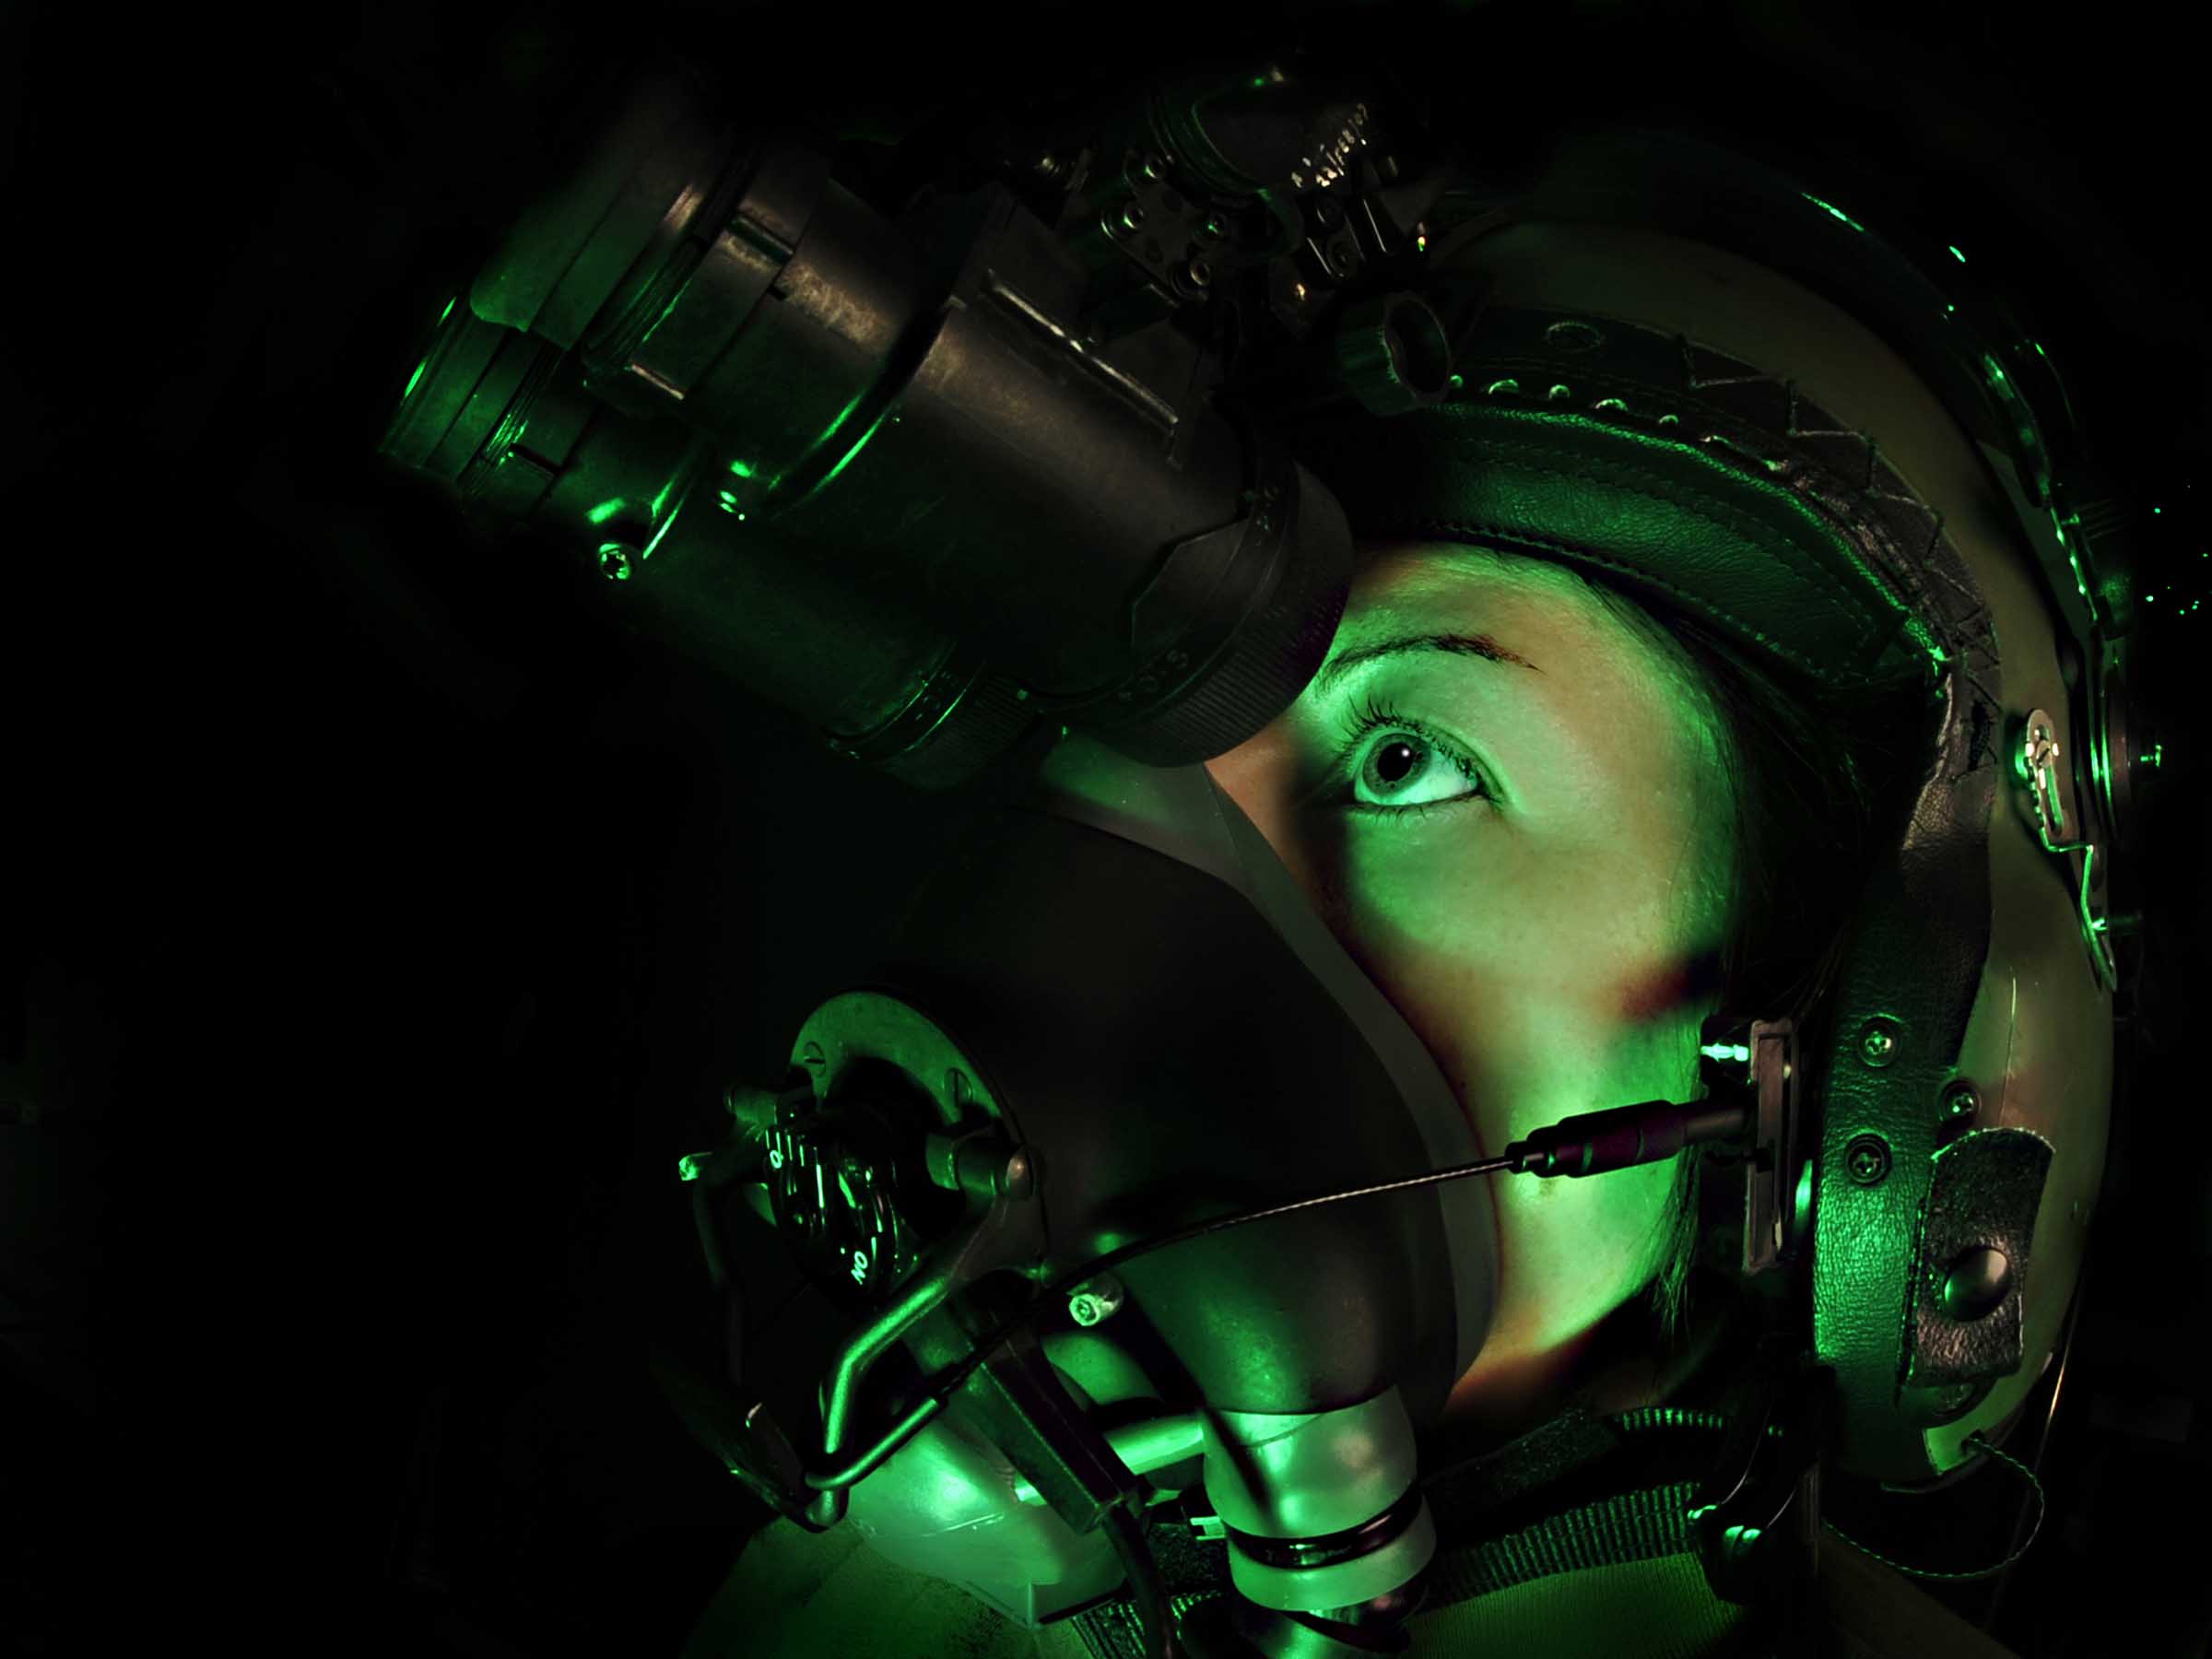 Image shows RAF aviator wearing night vision goggle headset.